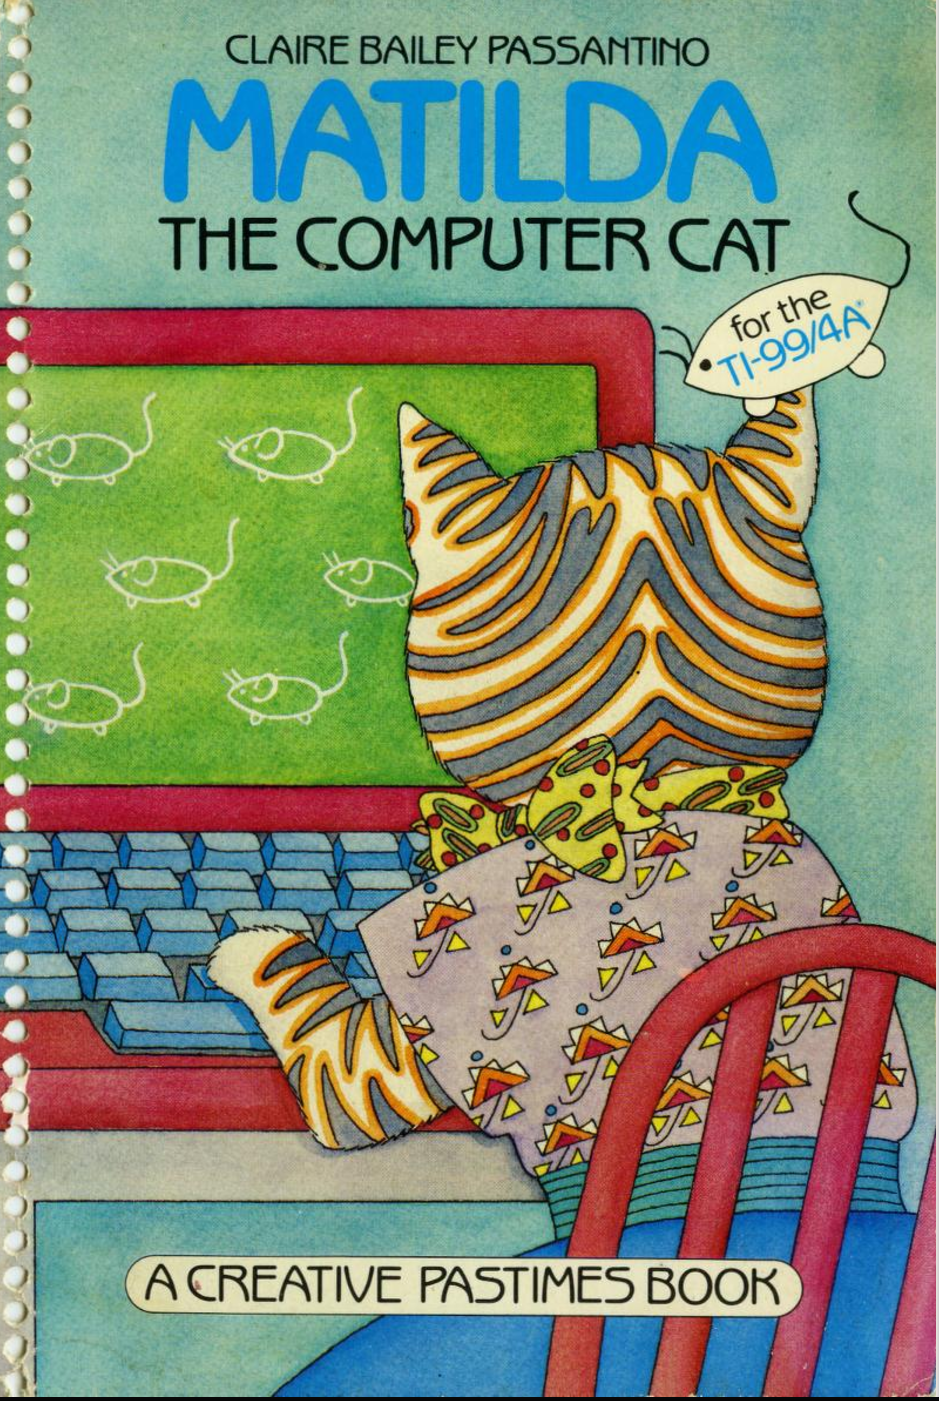 The computer cat